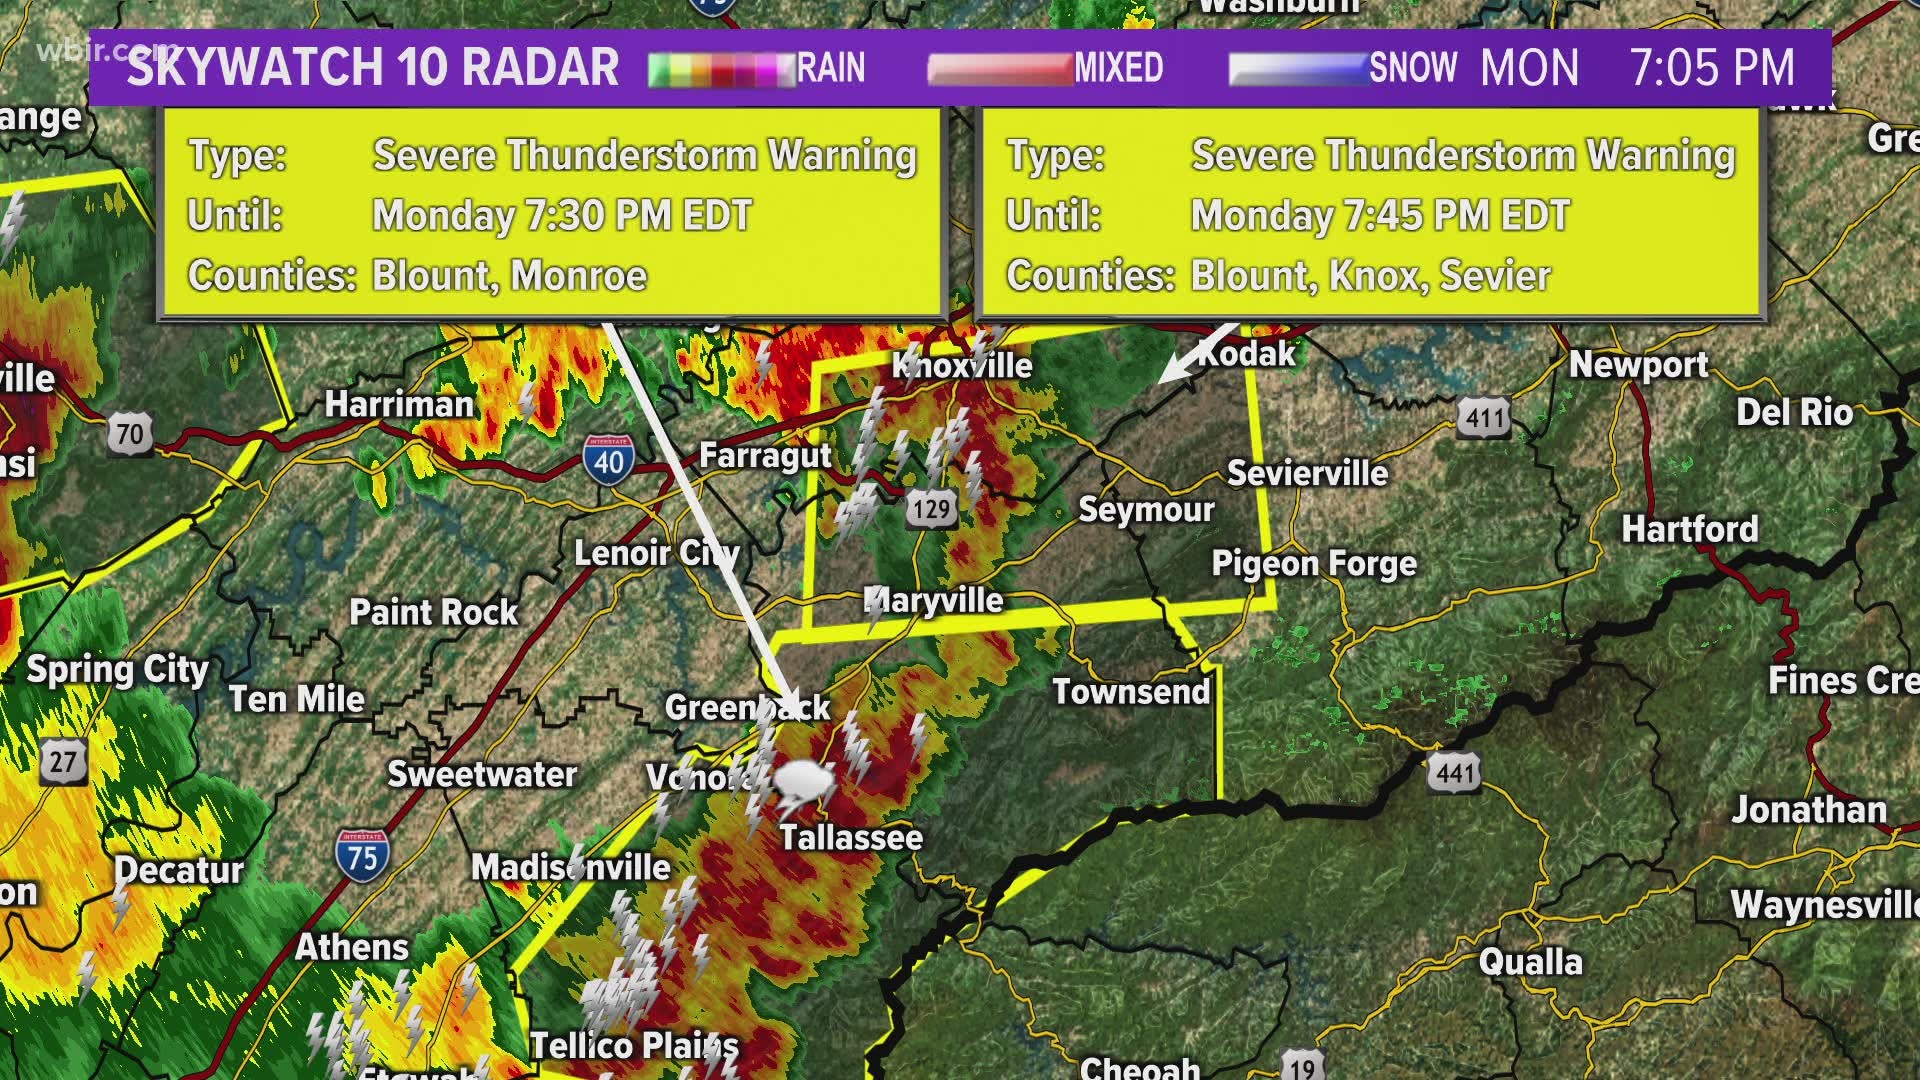 A severe thunderstorm warning is in effect for Knox, Blount, Sevier County until Jun 21 7:45PM.